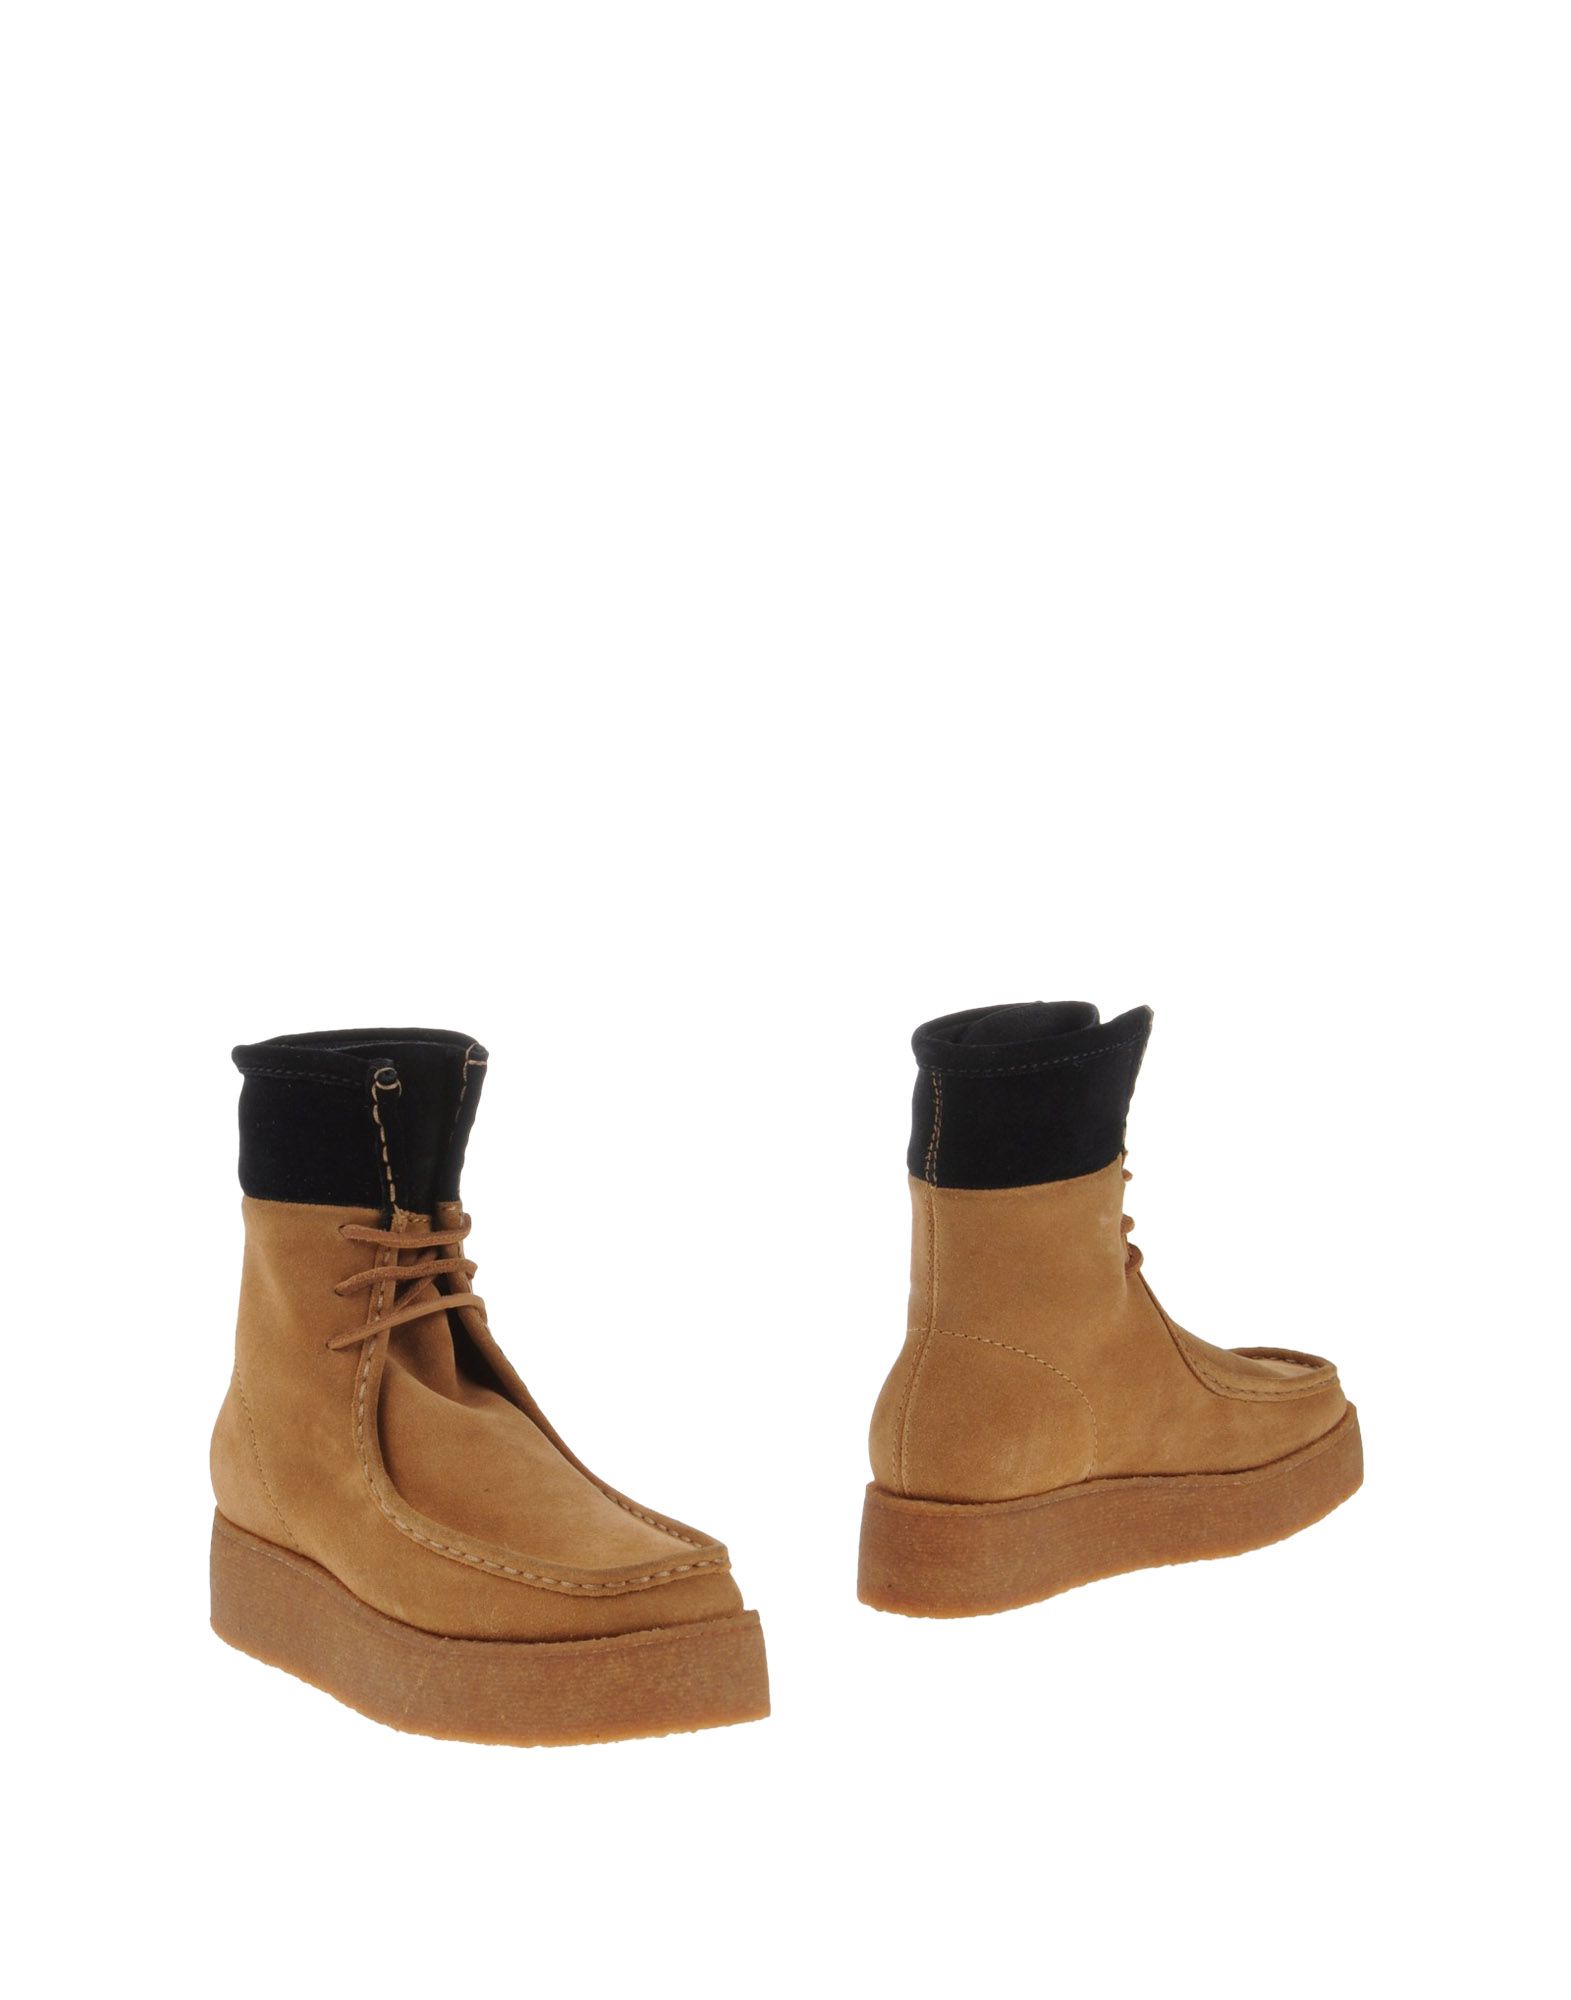 ALEXANDER WANG Ankle boot,11170139DH 11